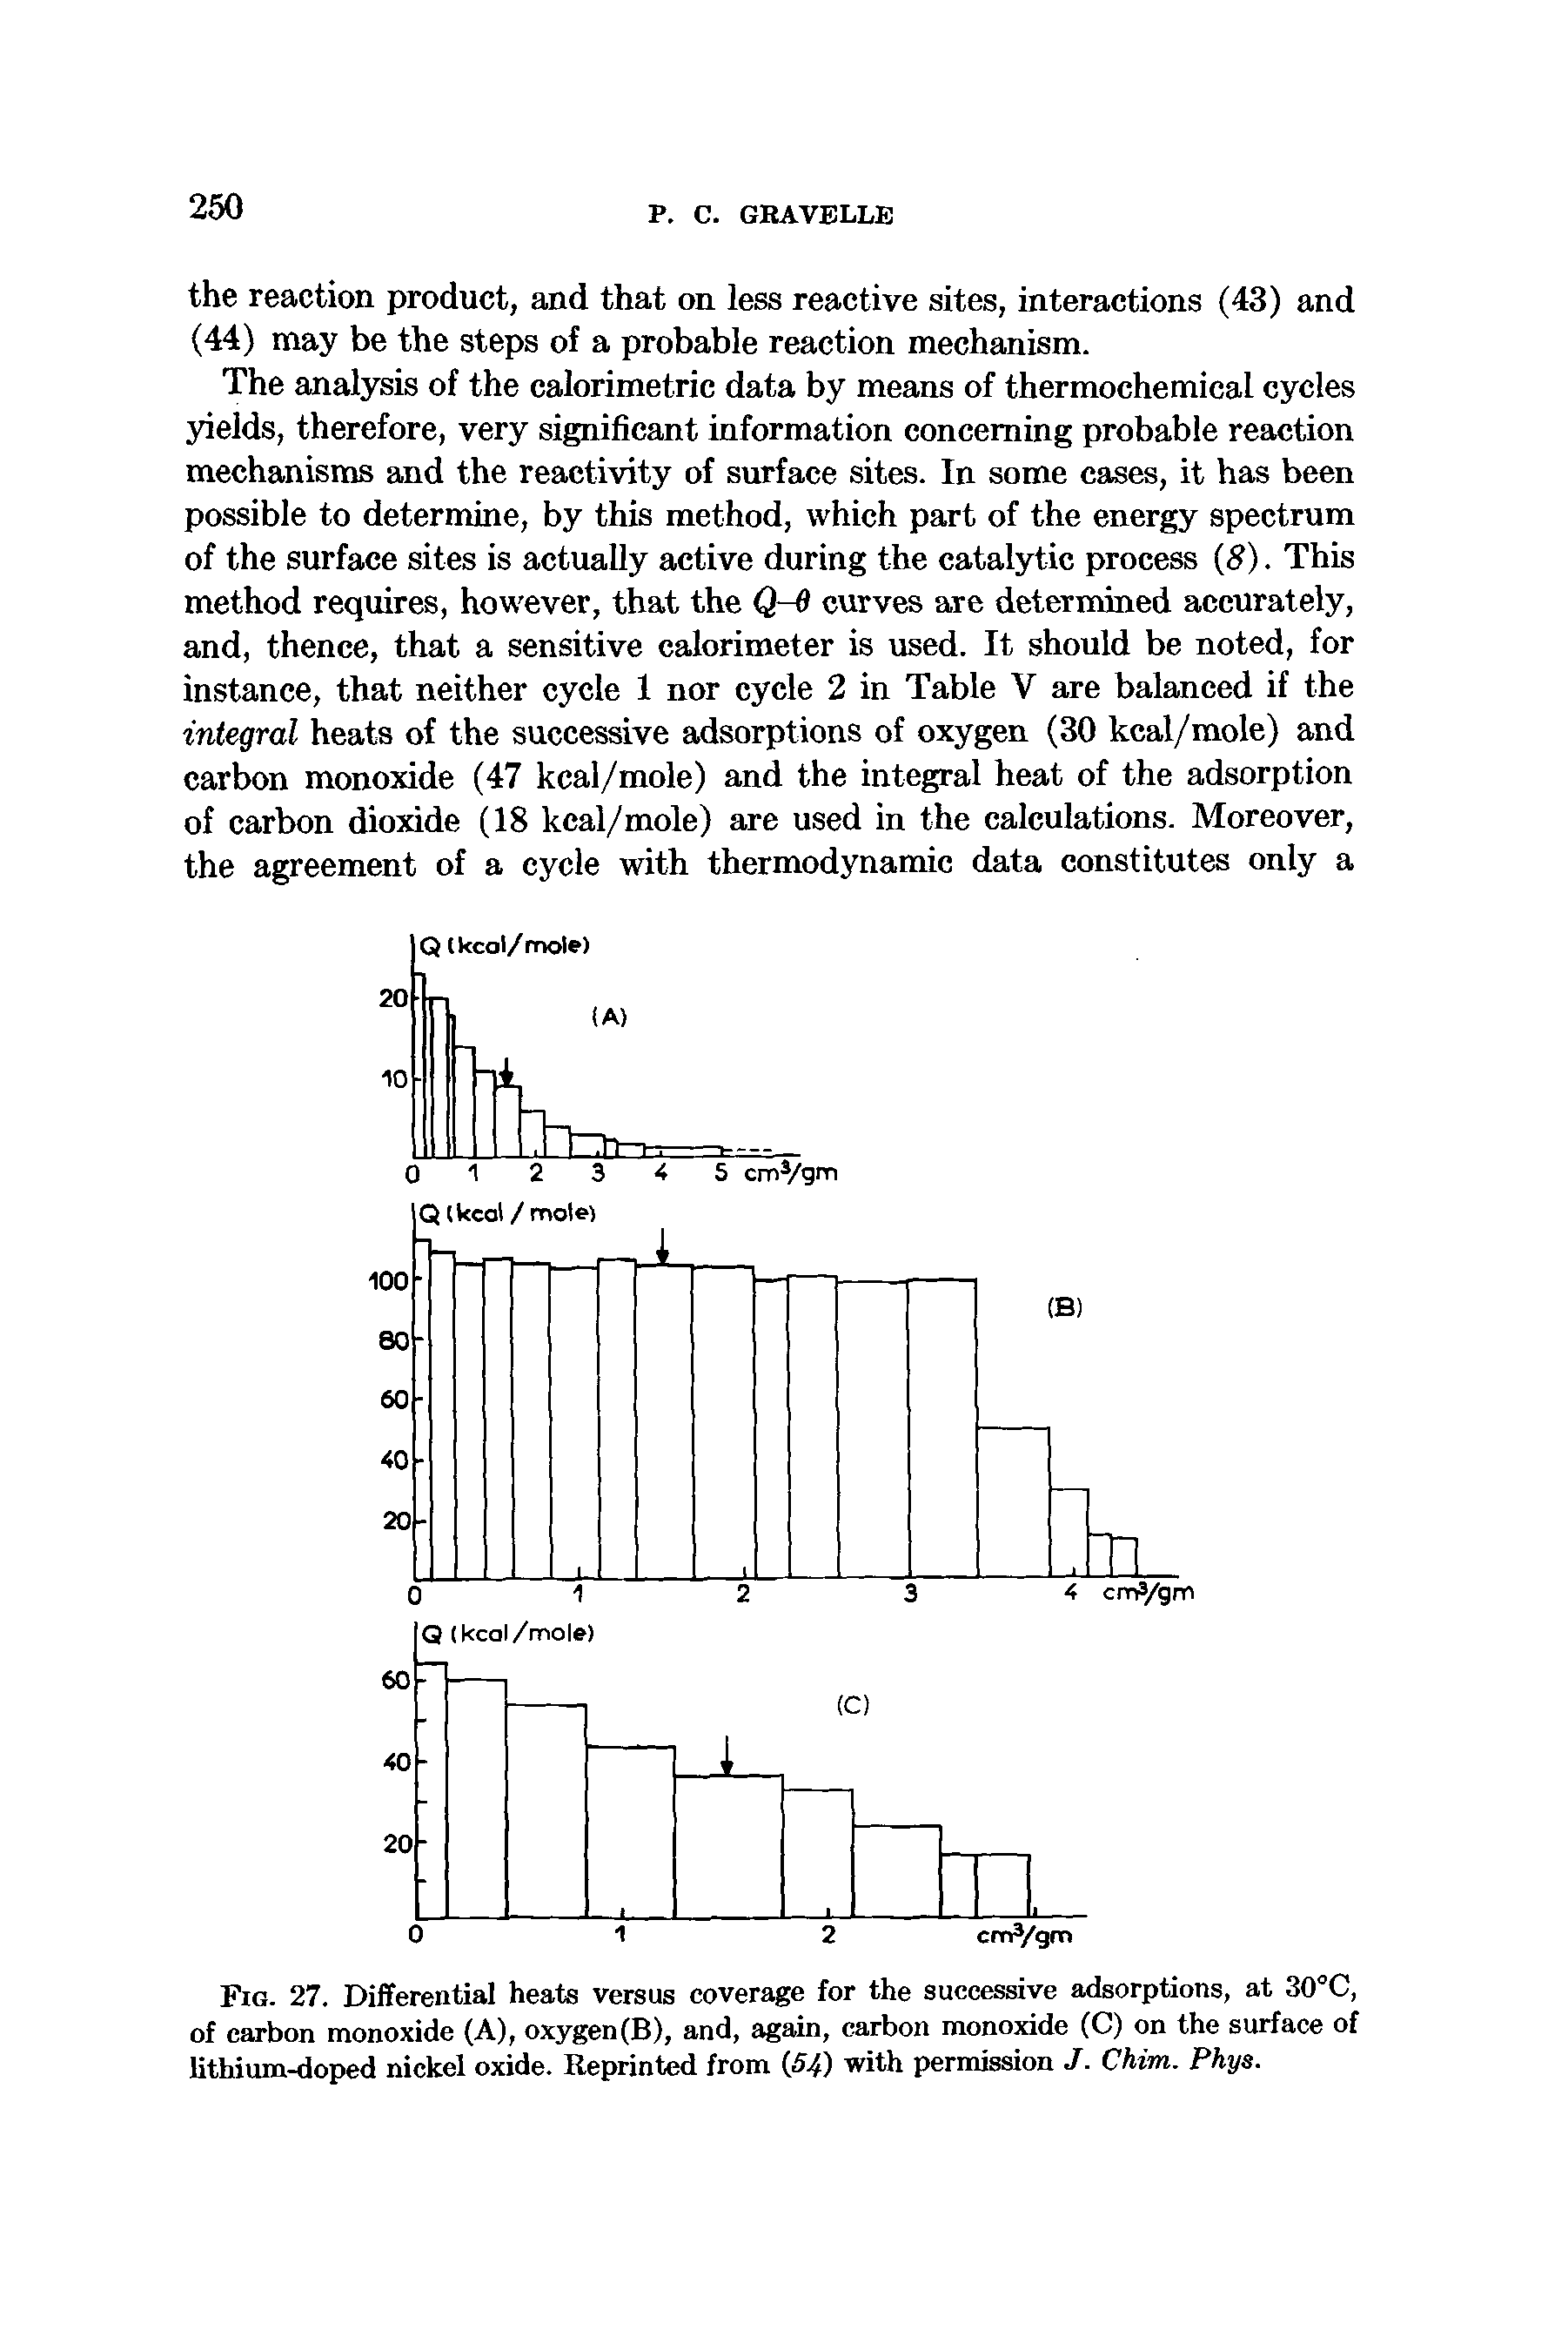 Fig. 27. Differential heats versus coverage for the successive adsorptions, at 30°C, of carbon monoxide (A), oxygen(B), and, again, carbon monoxide (C) on the surface of lithium-doped nickel oxide. Reprinted from (54) with permission J. Chim. Phys.